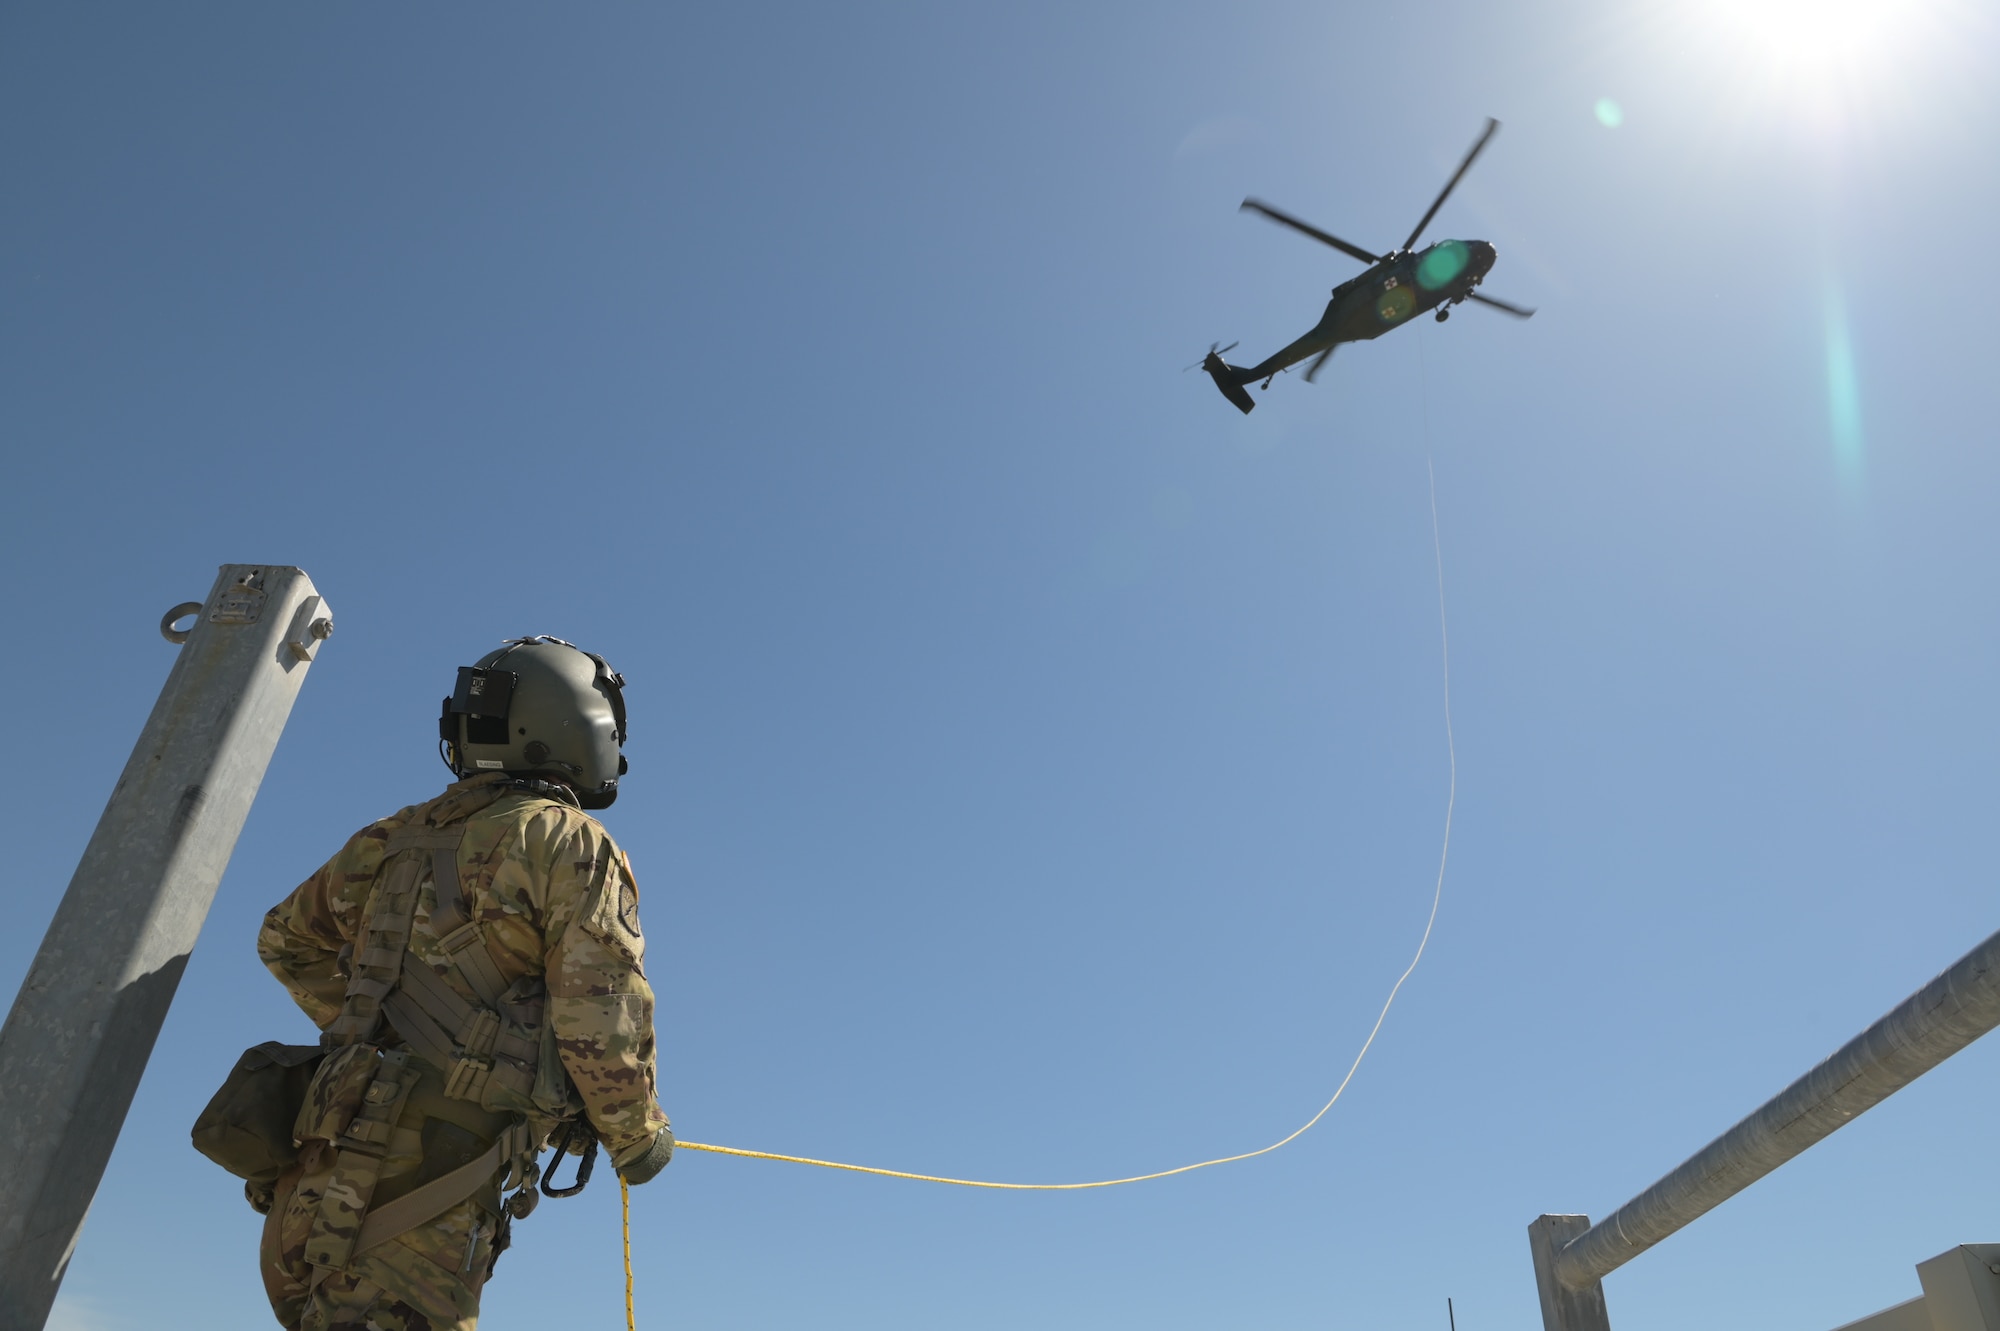 An Army Soldier is standing on the ground tethered to a UH-60 Blackhawk Rescue Helicopter